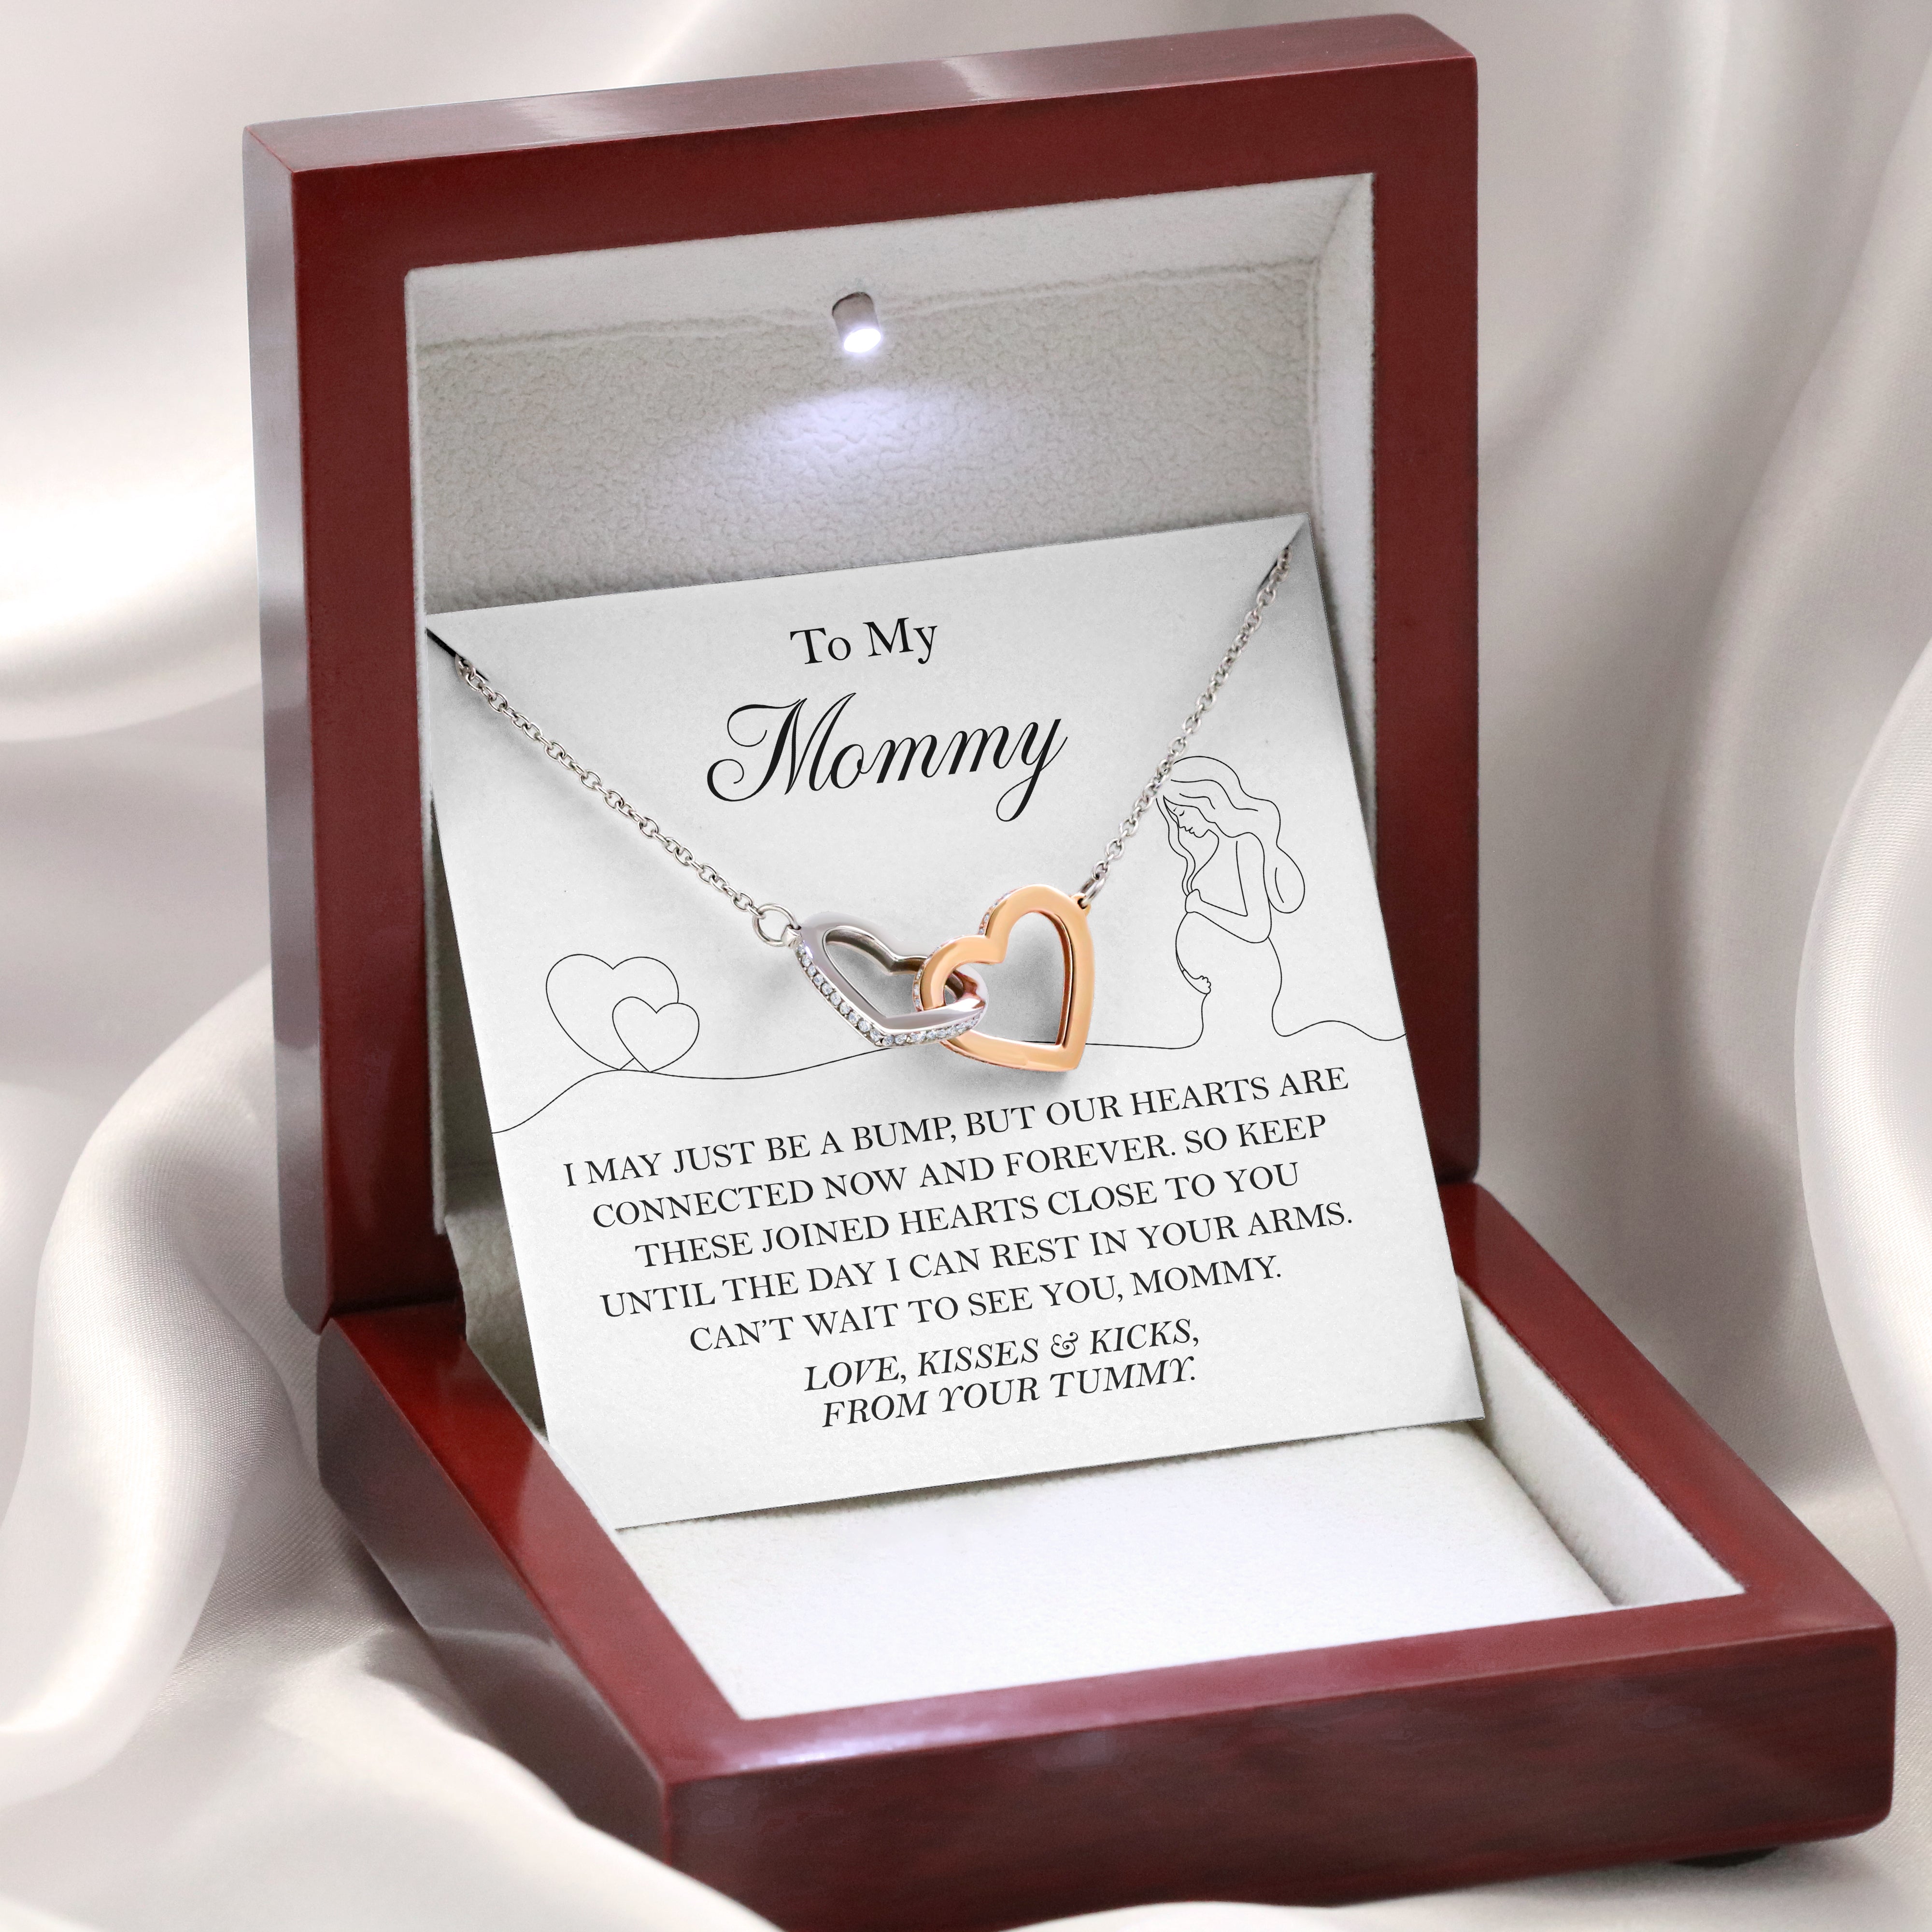 "To my Mommy" Joined Hearts Necklace